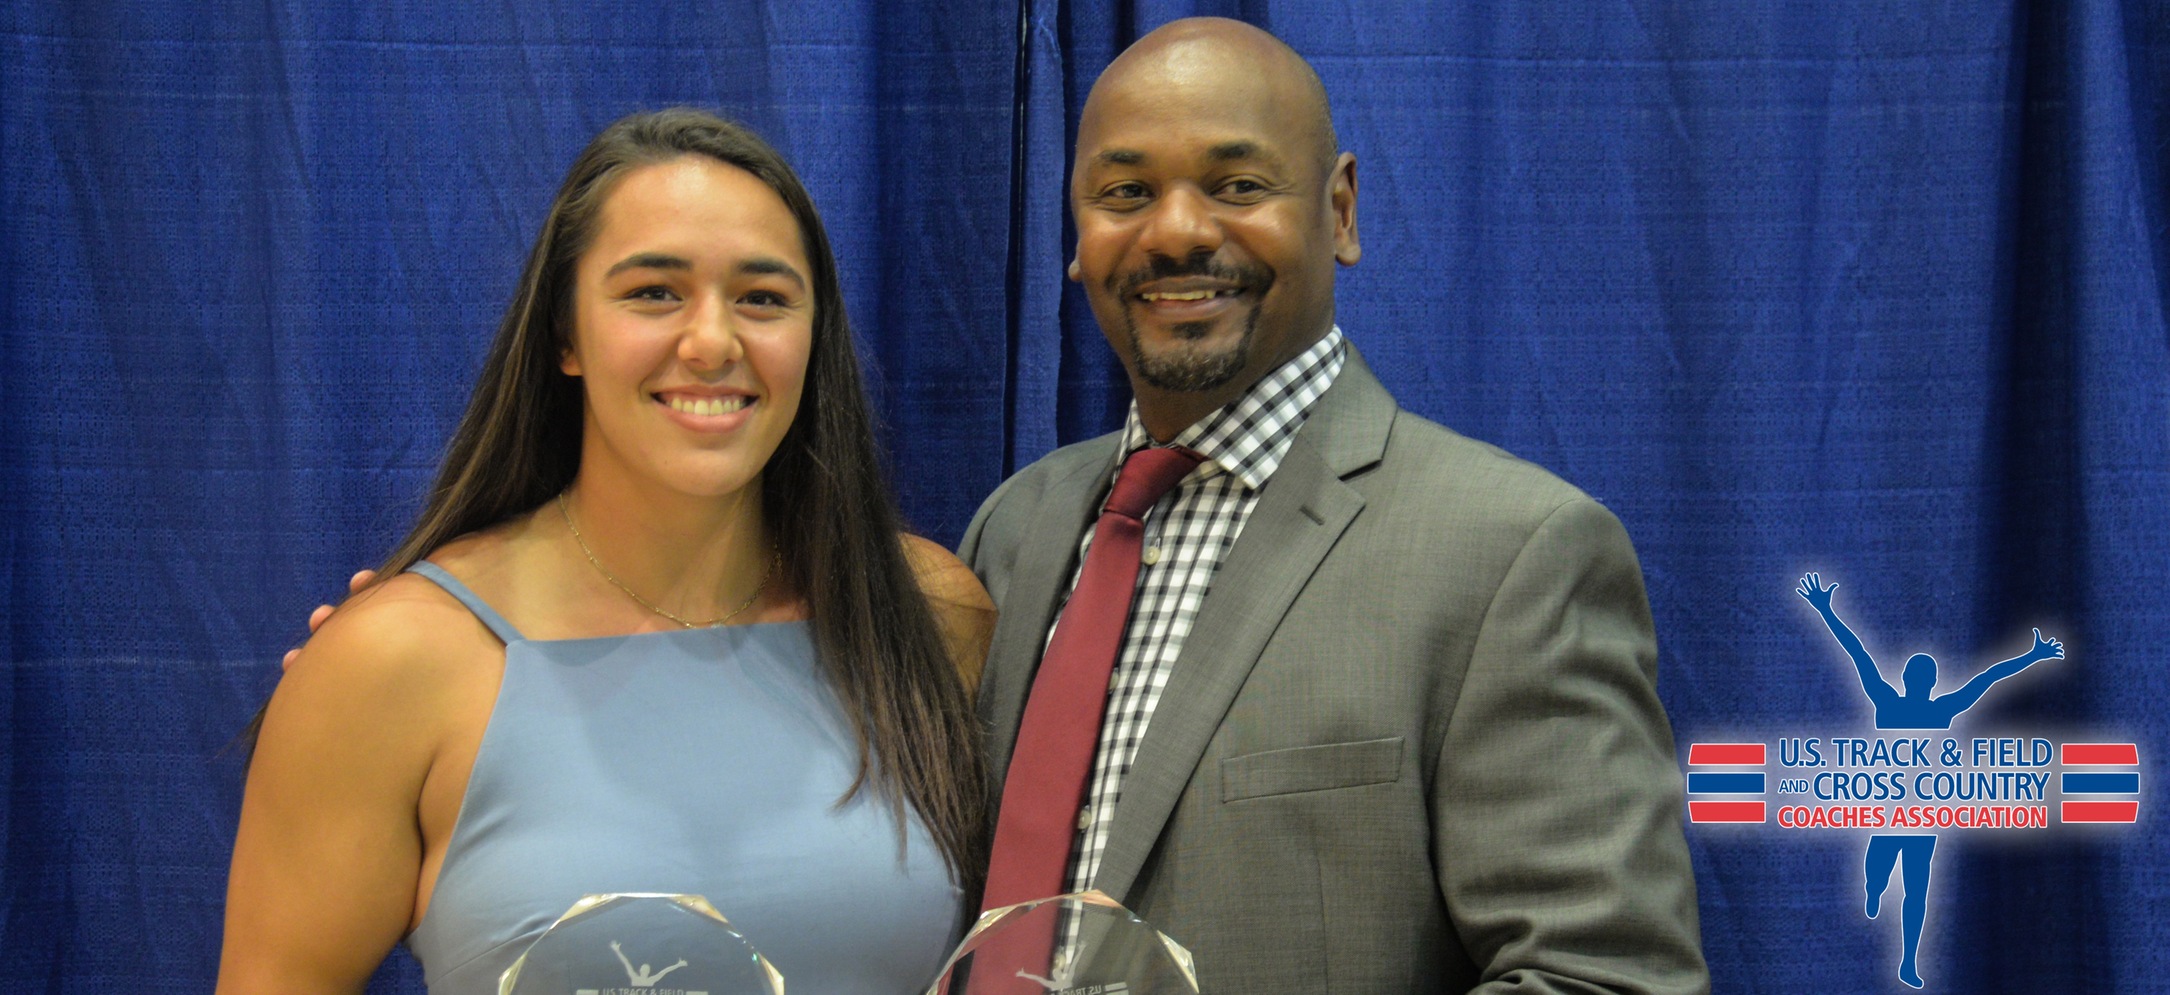 Emily Bassett (CMC) was named West Region Field Athlete of the Year and Glenn Stewart was named West Region Coach of the Year. (photo credit: Chris Spells)